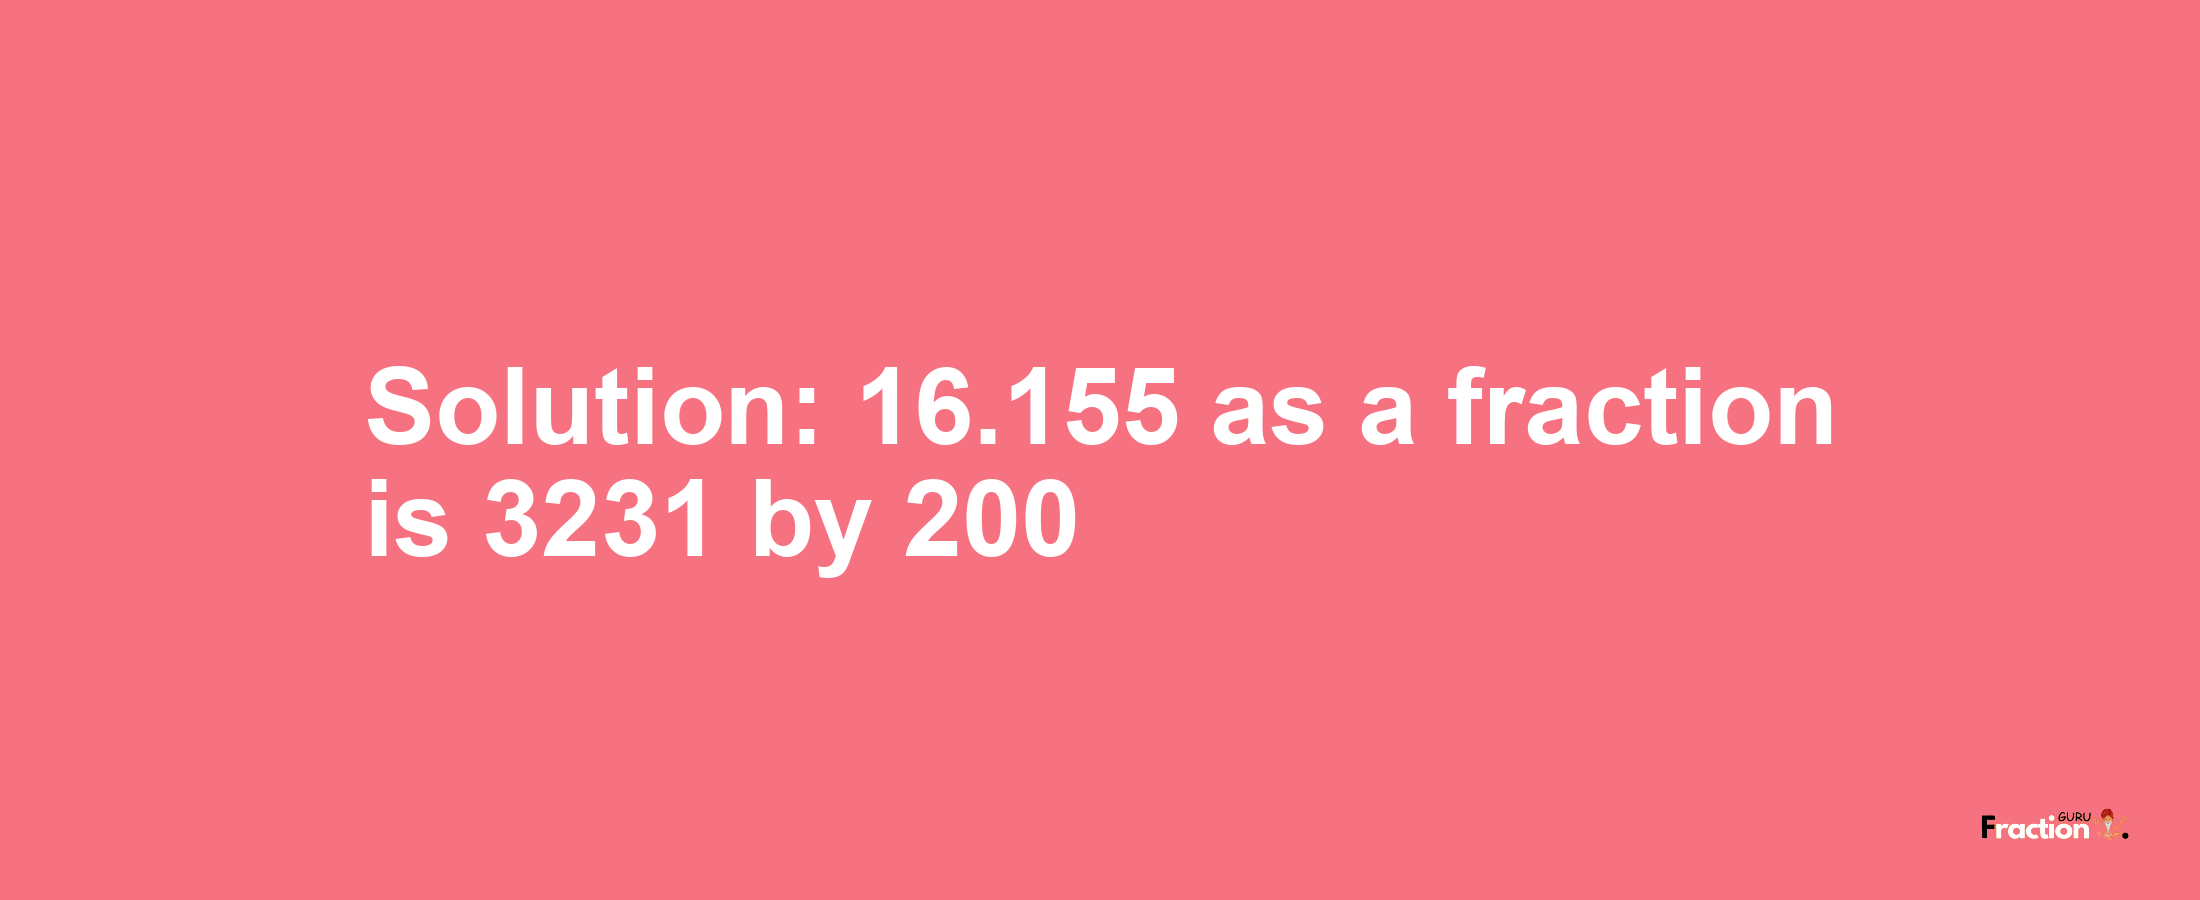 Solution:16.155 as a fraction is 3231/200